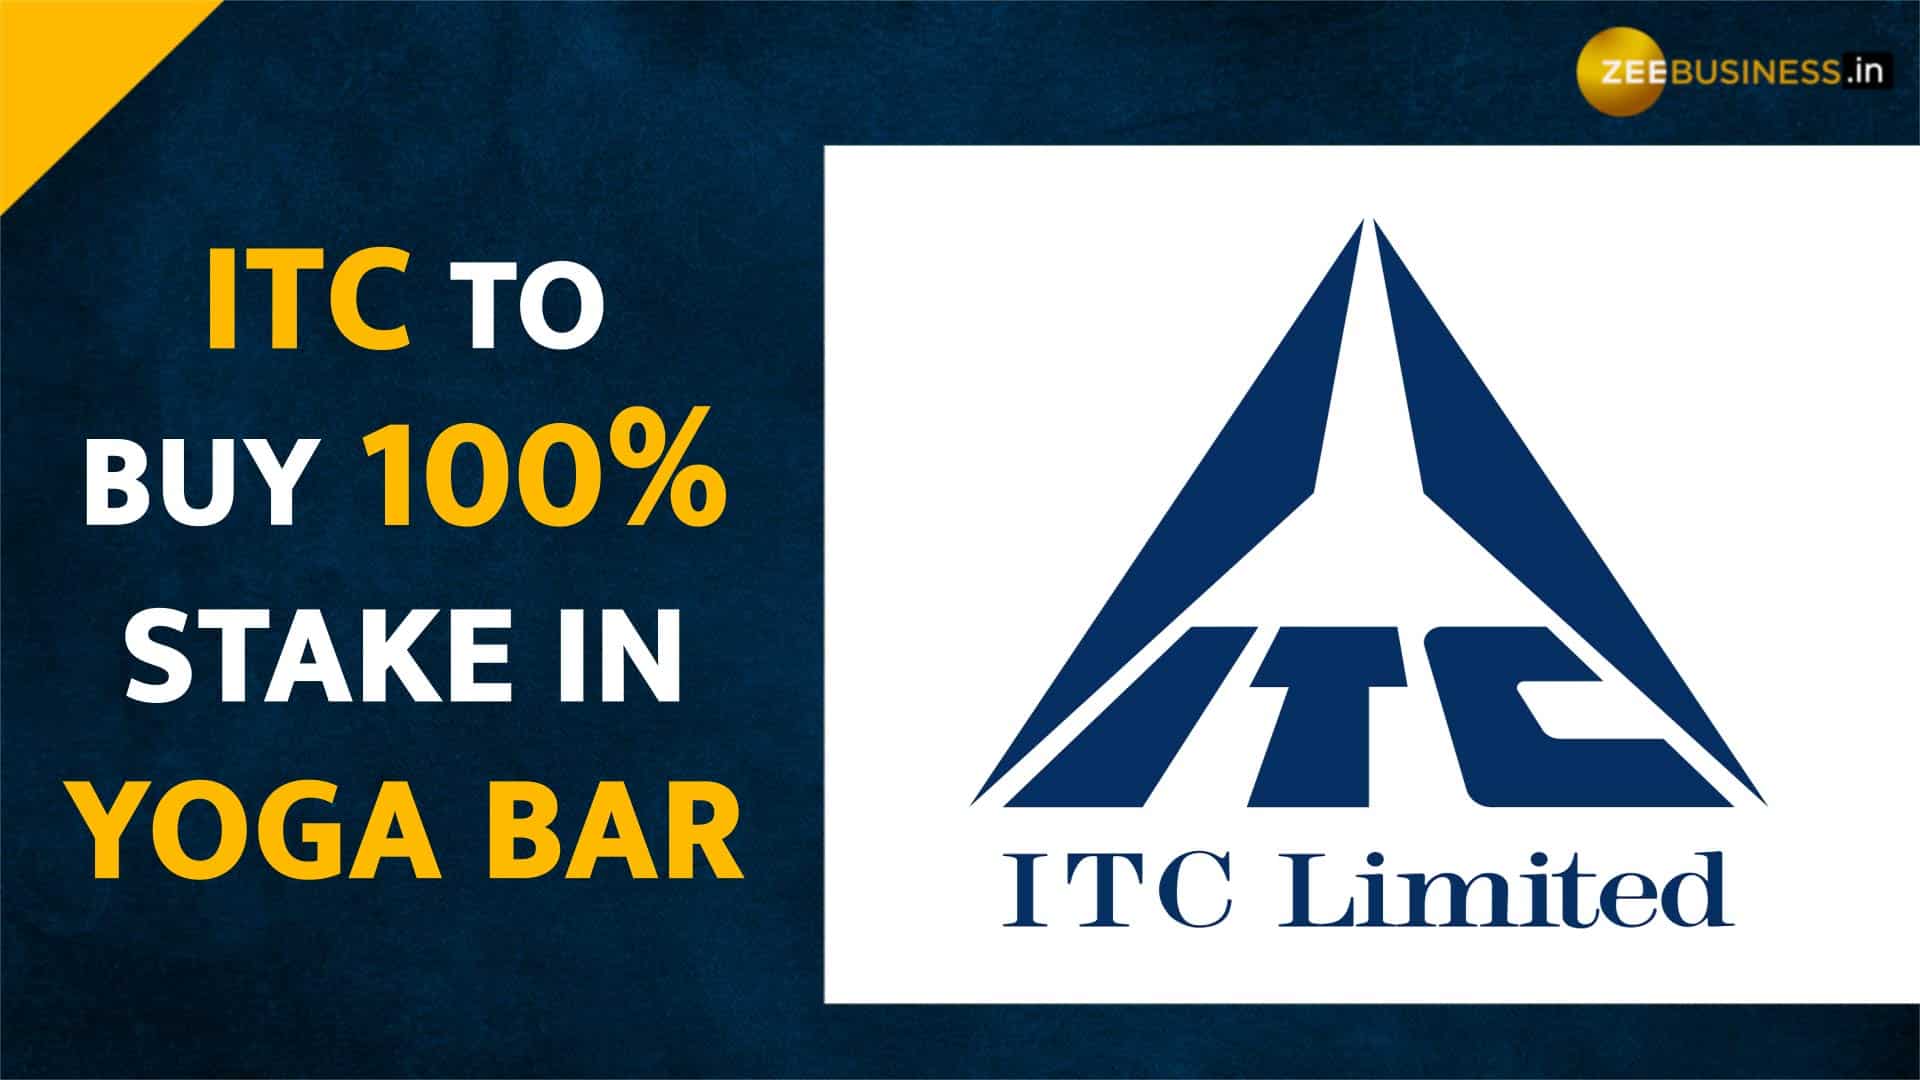 ITC-Yoga Bar Acquisition: FMCG major increases its shareholding in  Sproutlife Foods, Details here